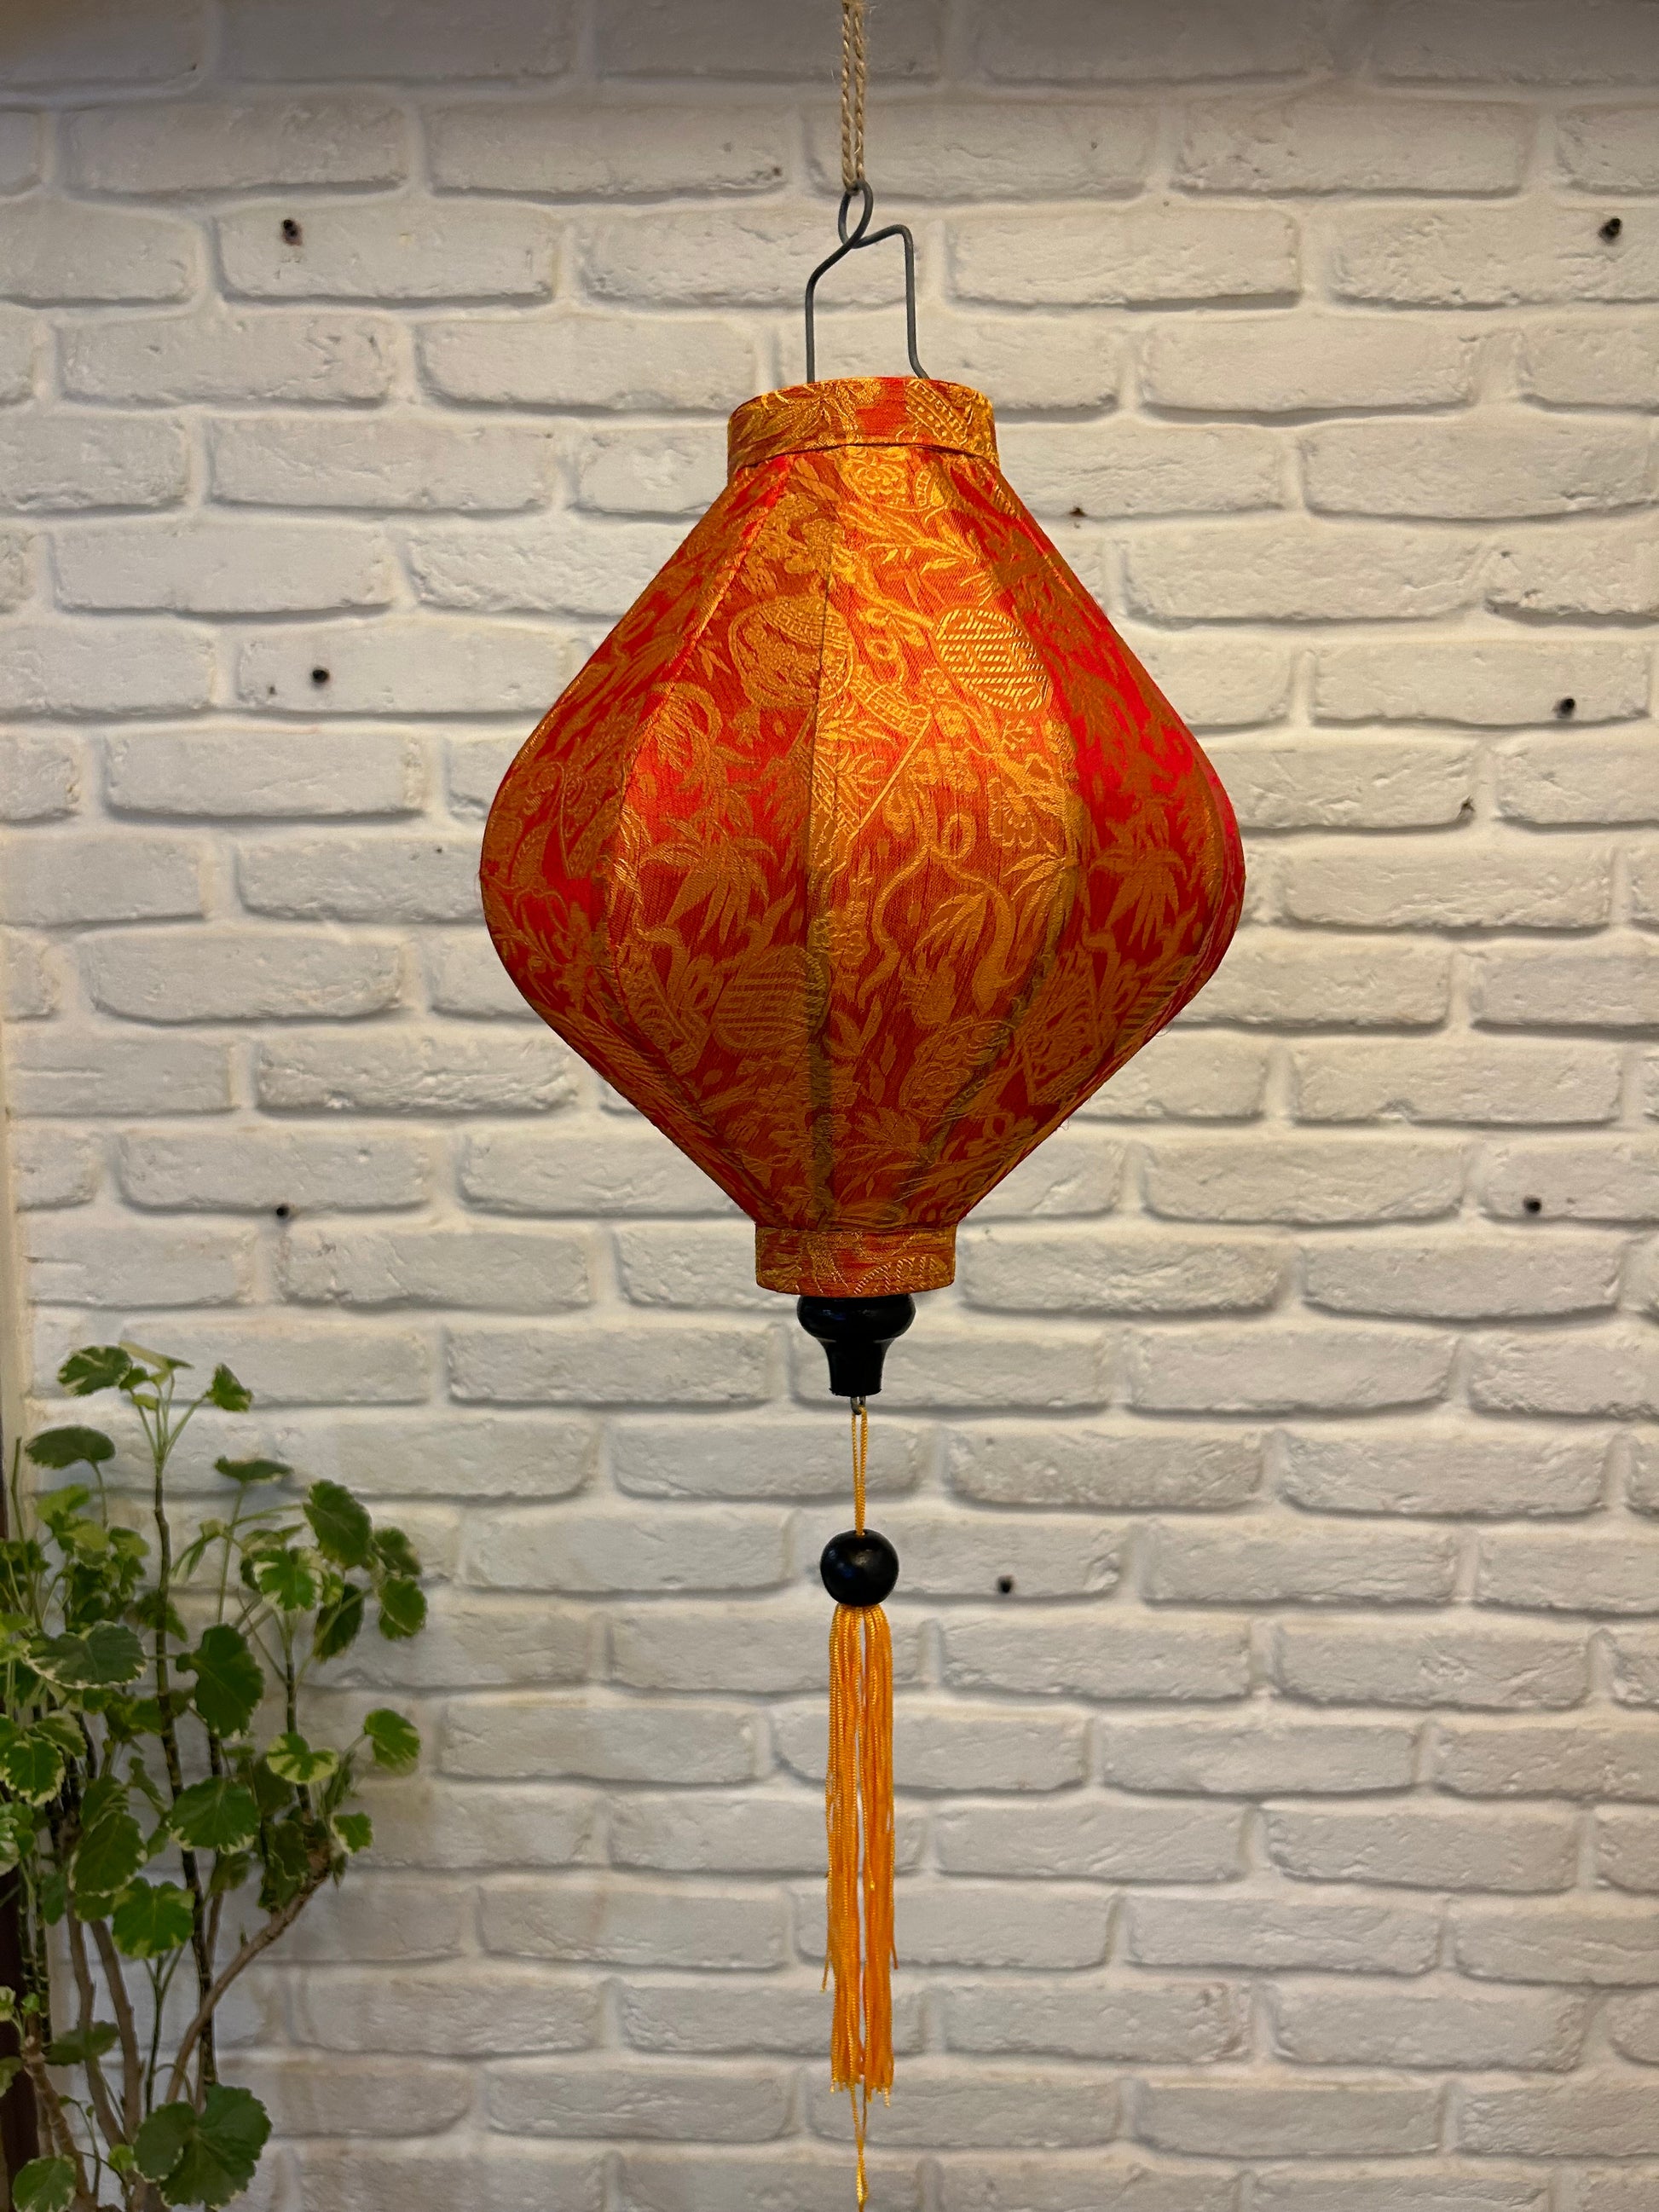 Buy Best Lampshade for your Dream Home & Garden  Asian-inspired décor, Authentic Vietnamese artwork, Bamboo frame lanterns, Celebration dinner décor, Culture-infused textures, Deep green and red lanterns, Drop-shaped lanterns, Folding technique lanterns,	 Hand-painted lanterns, Home decor lanterns, Premium silk lanterns, Restaurant décor, Silk lantern décor, Vietnamese silk lanterns, Wedding lanterns, TESU